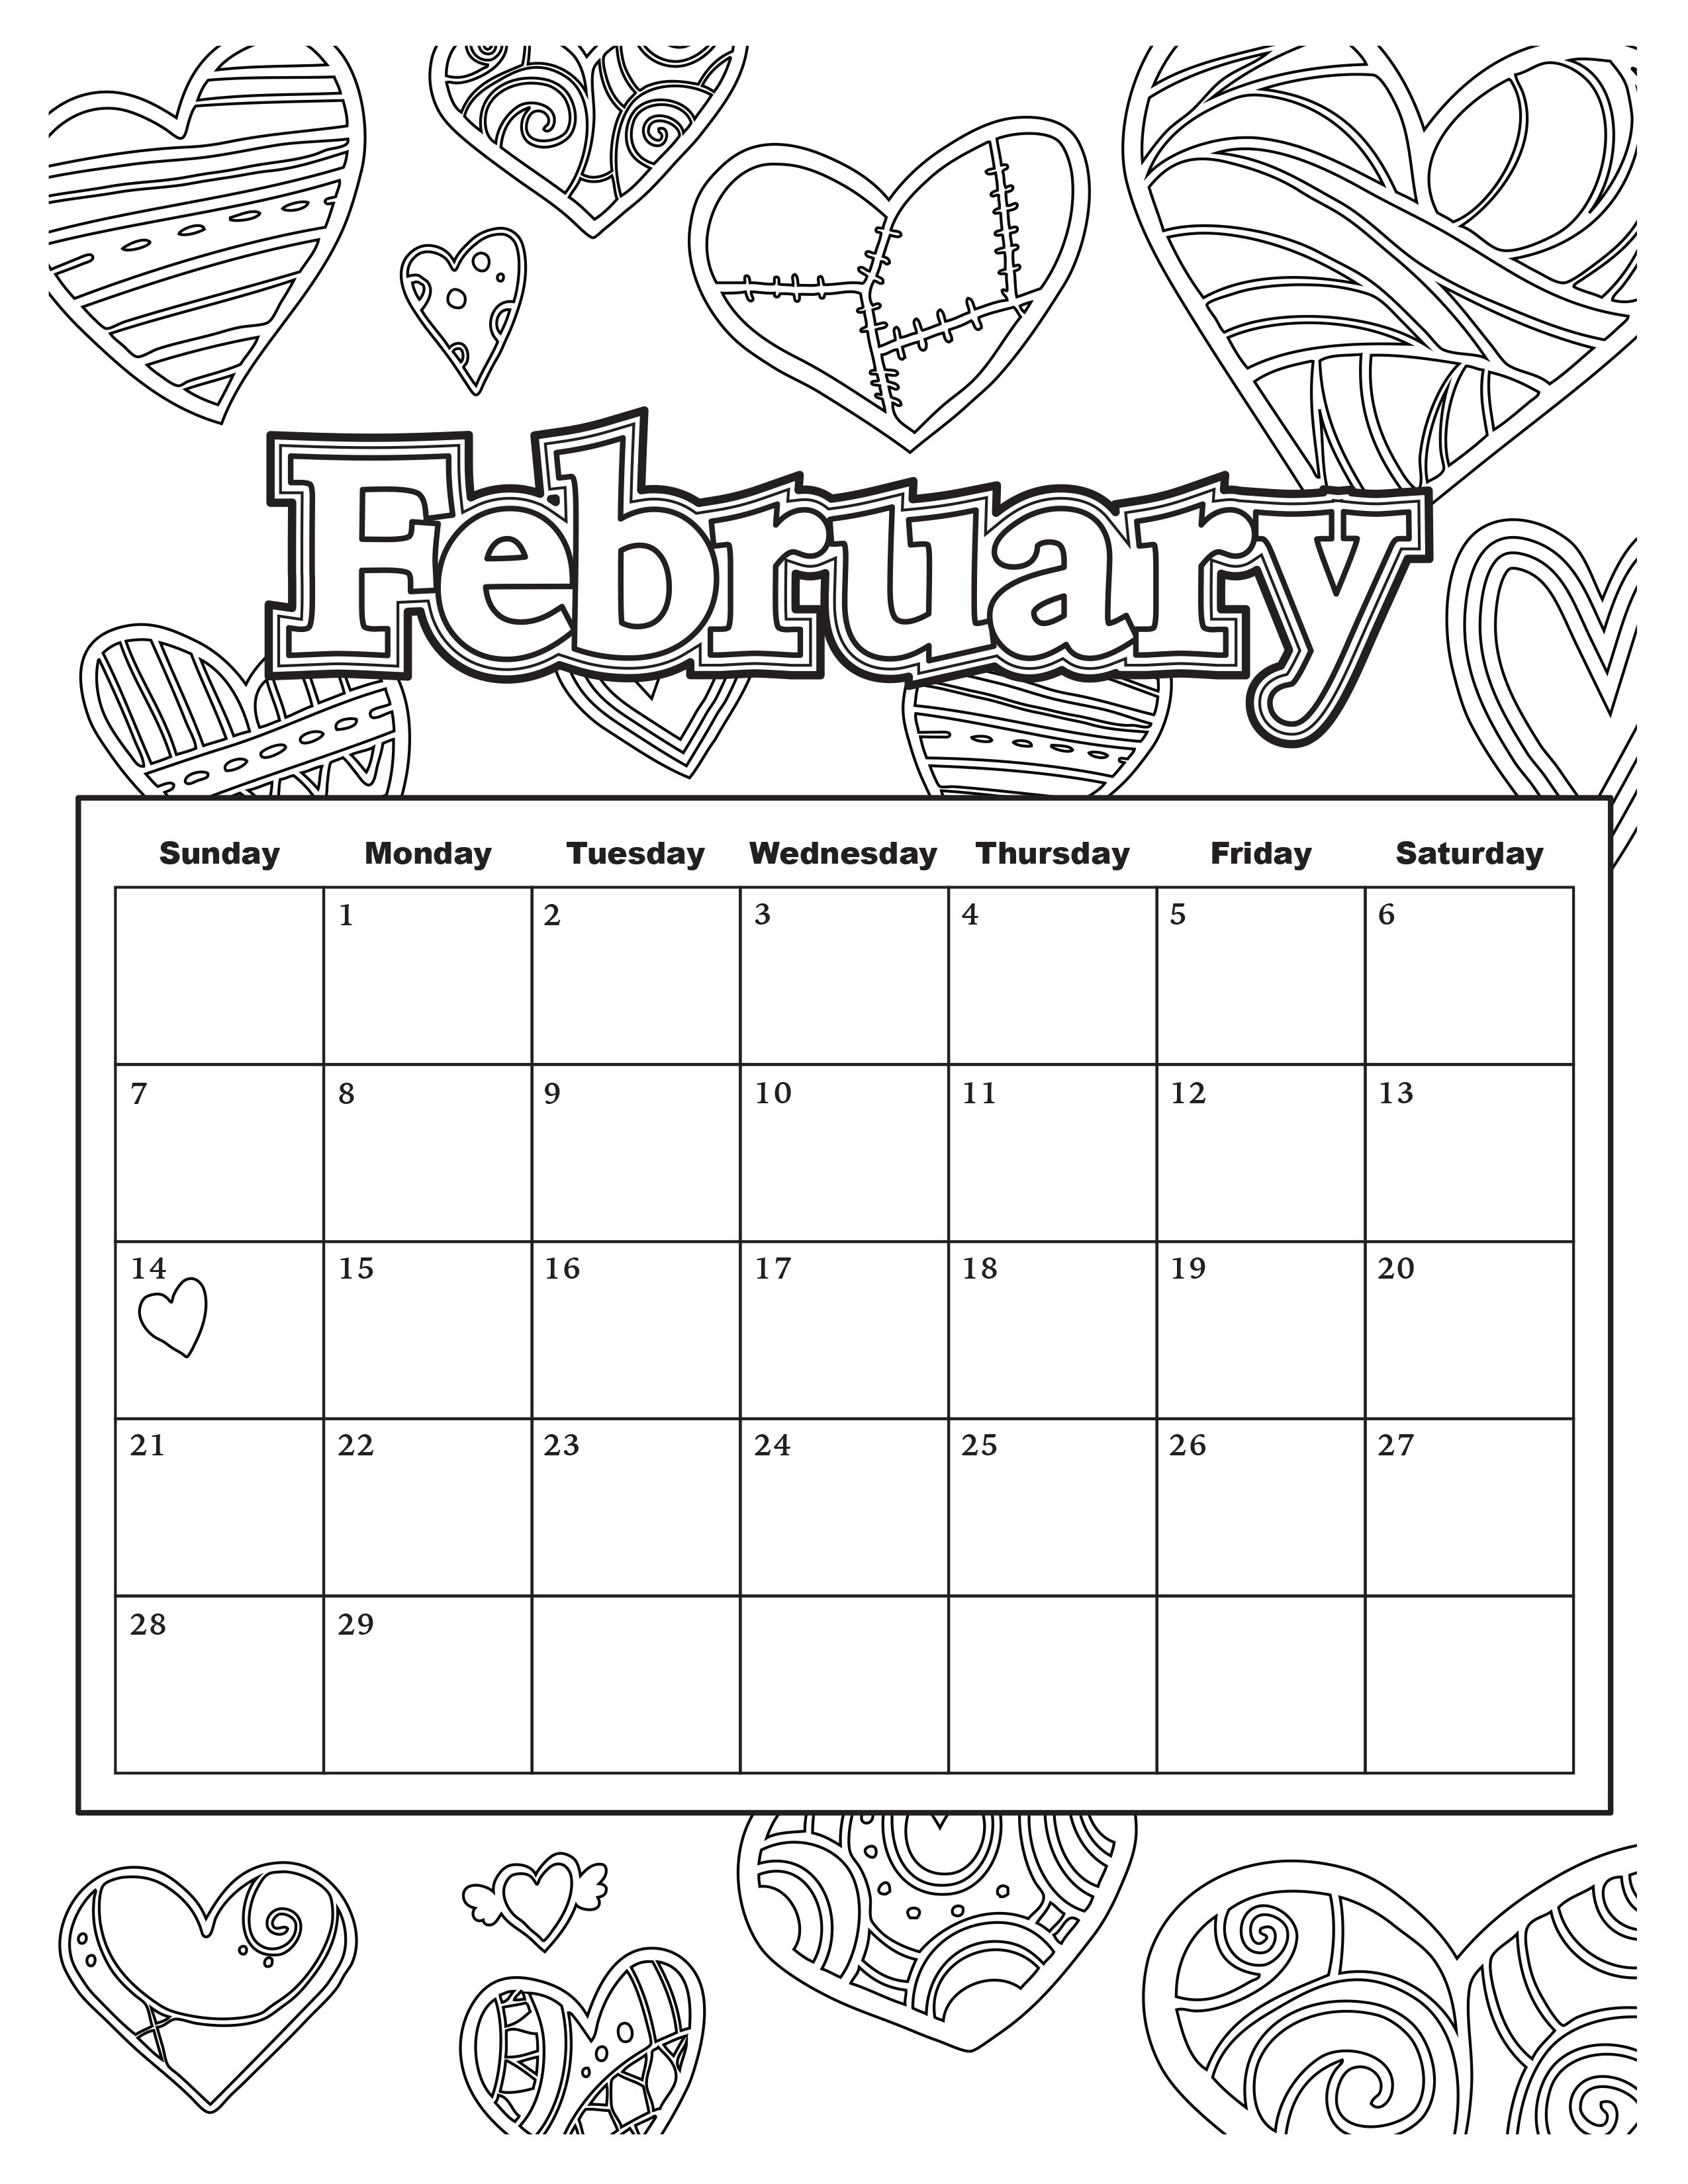 template-for-decorative-calendar-stock-vector-illustration-of-flowers-template-24373214